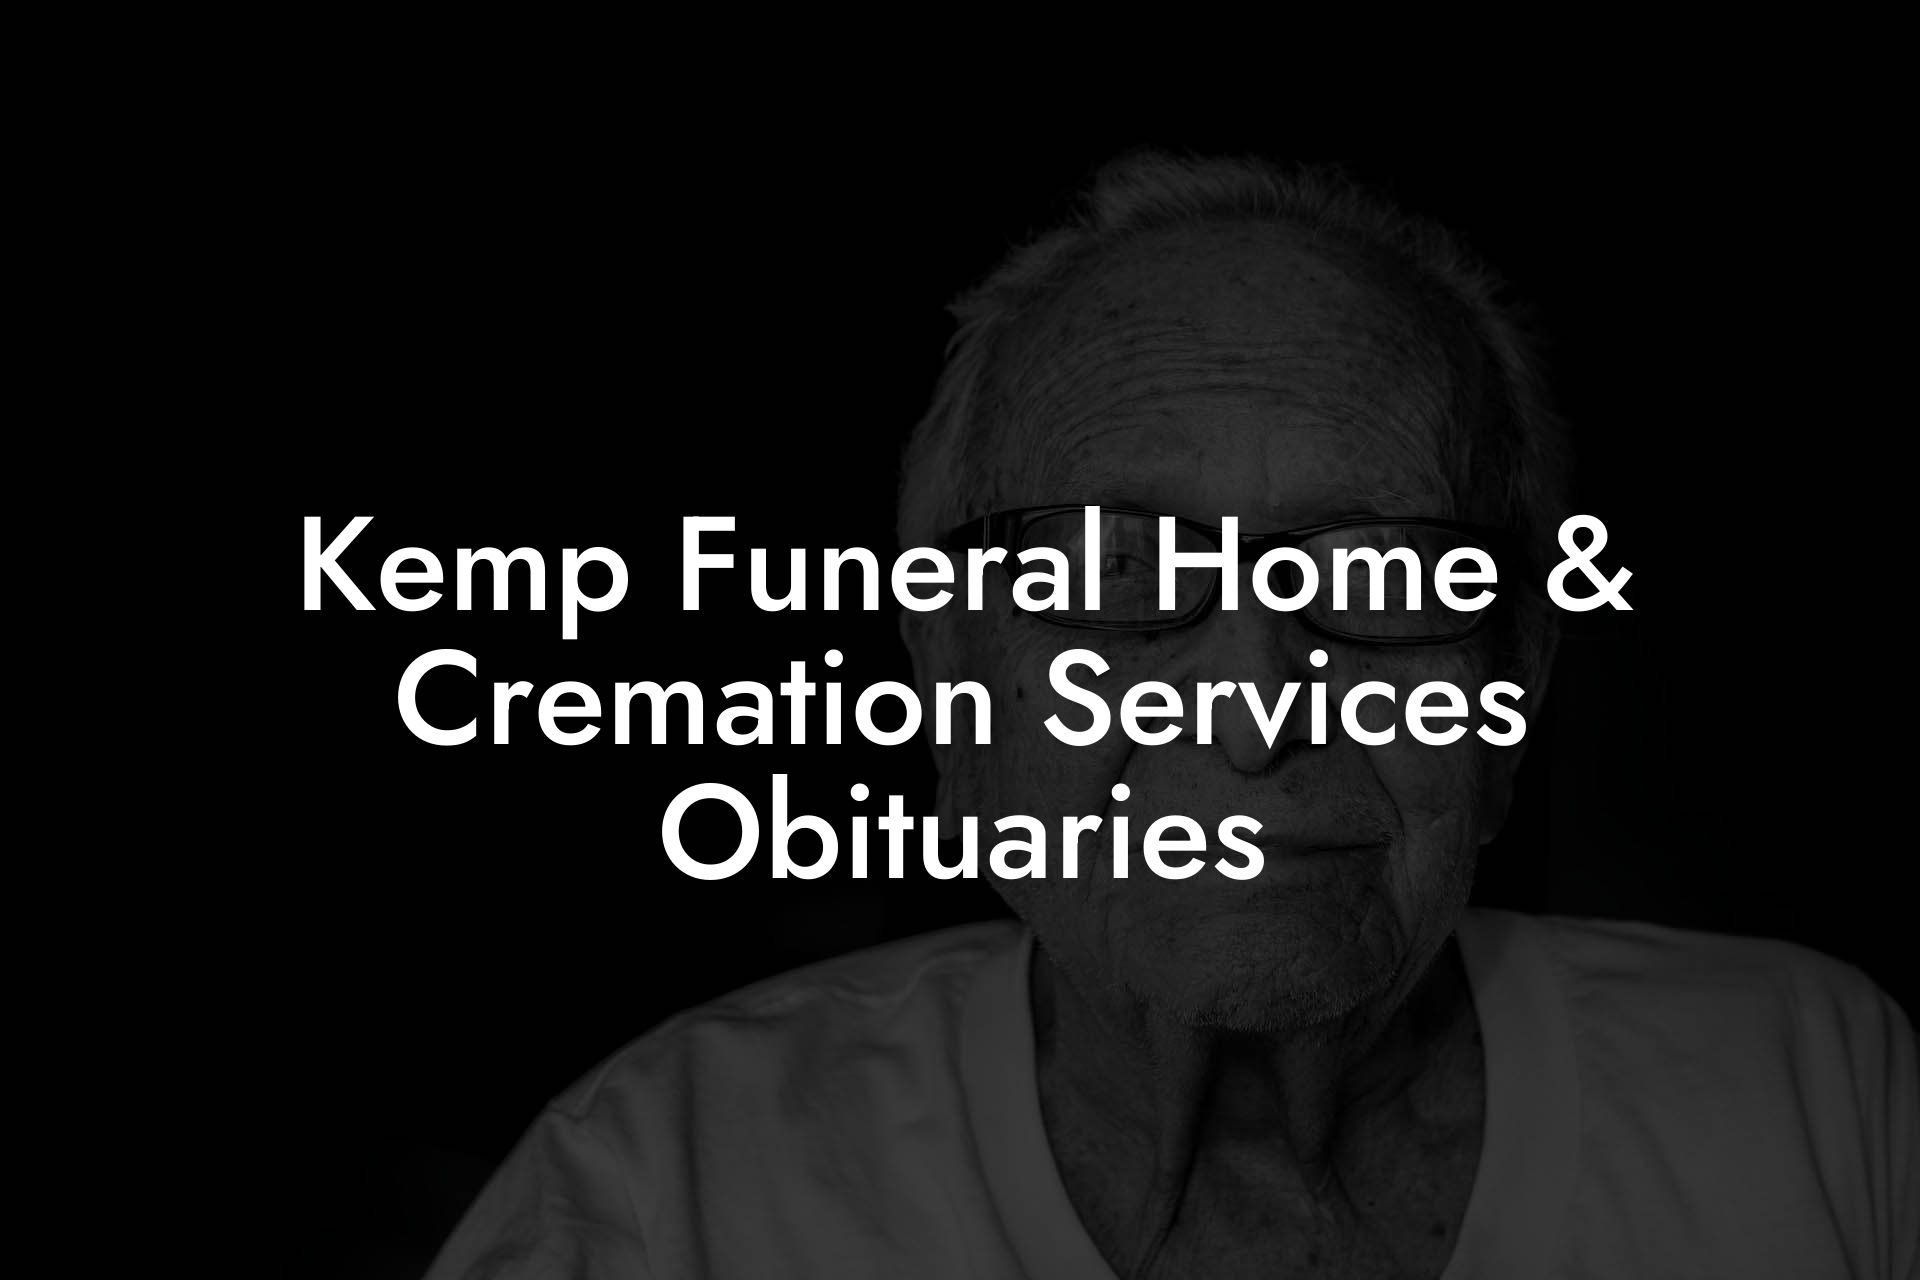 Kemp Funeral Home & Cremation Services Obituaries